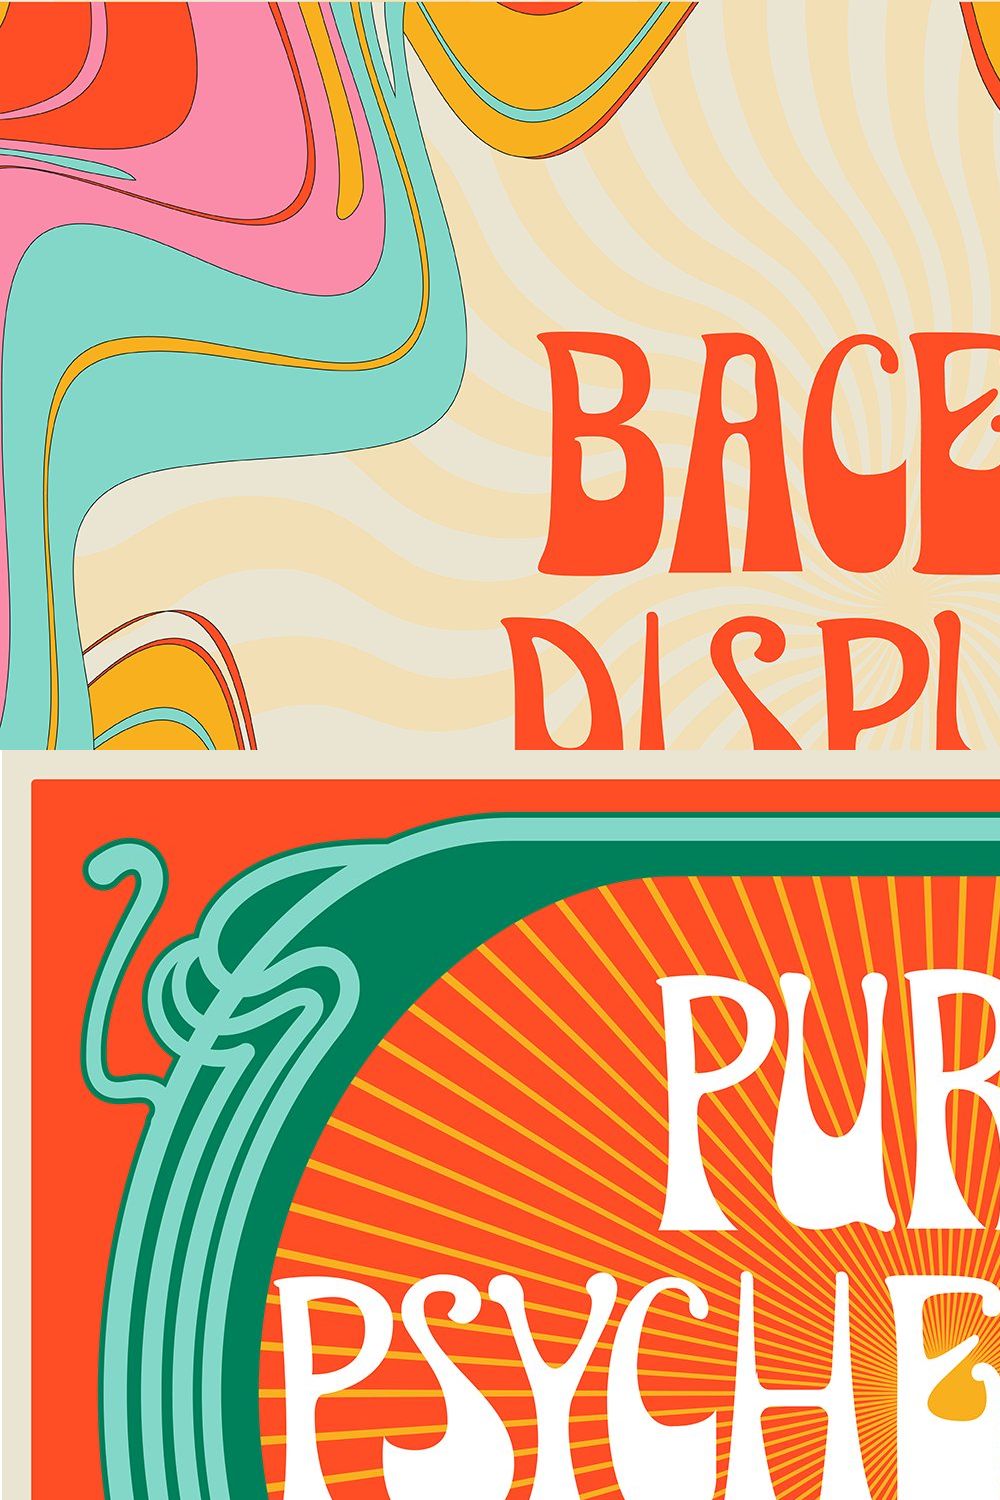 Bacesy Psychedelic Font pinterest preview image.